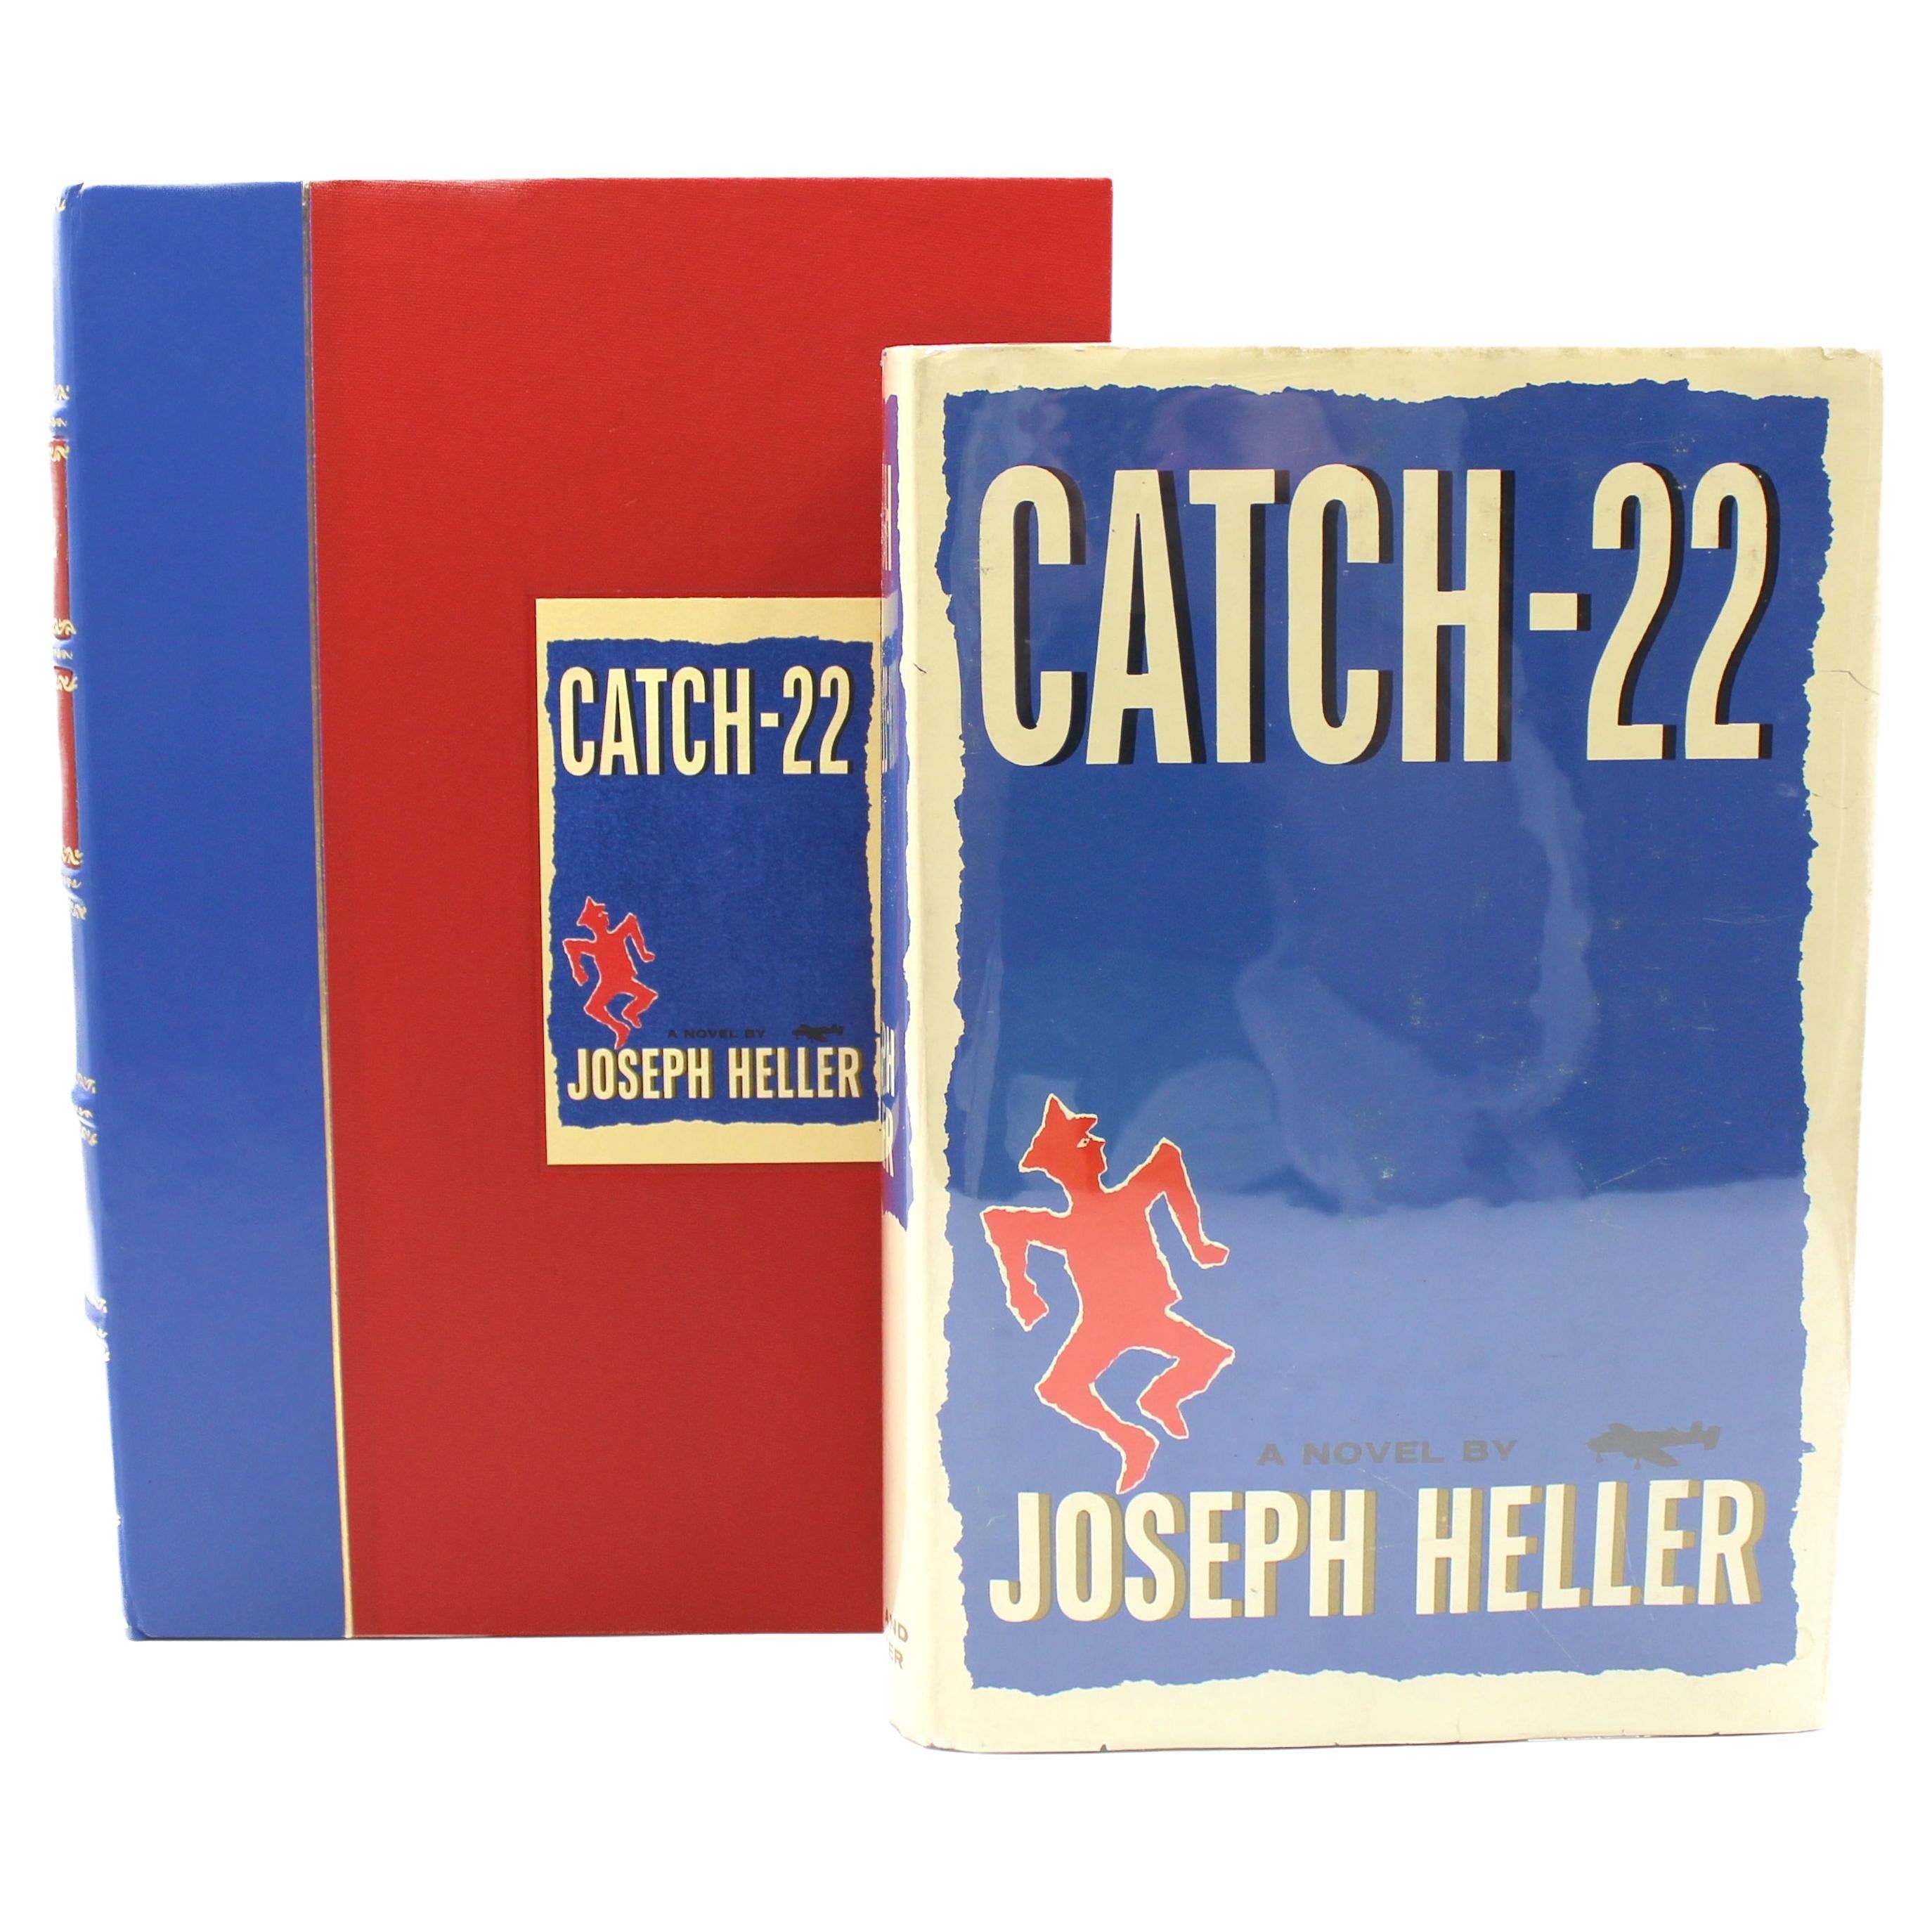 Catch-22 by Joseph Heller, First Edition, First Printing, in Original DJ, 1961